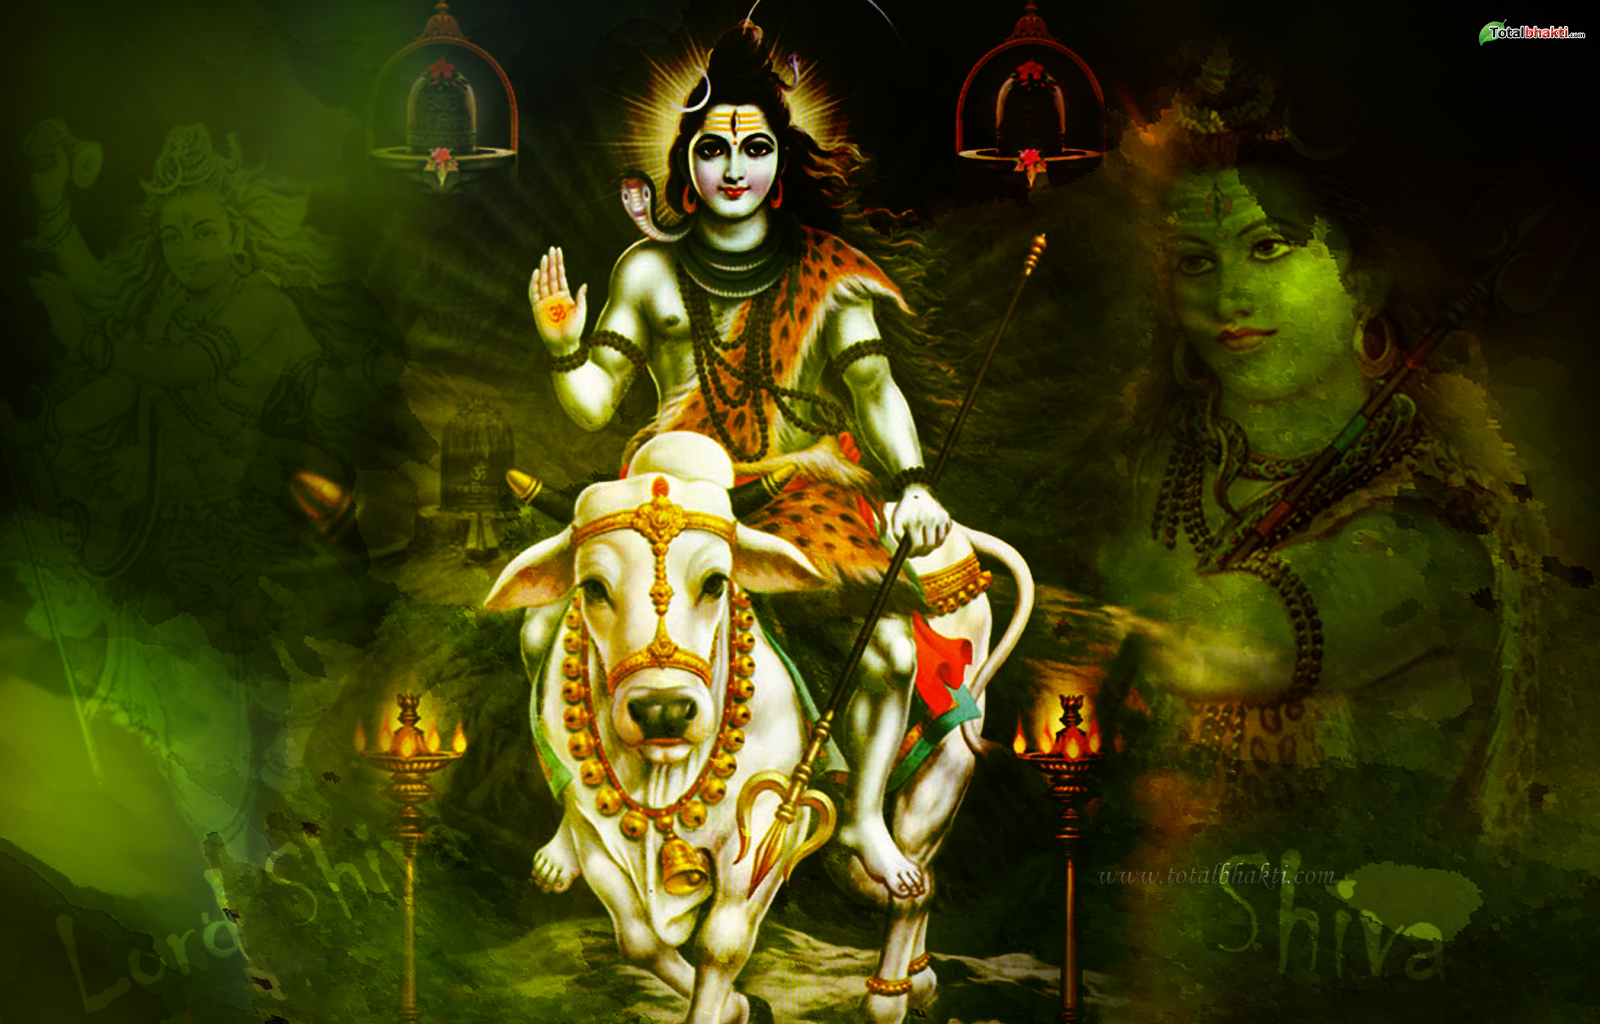 Lord Shiva 4k Ultra Hd Wallpapers For Mobile